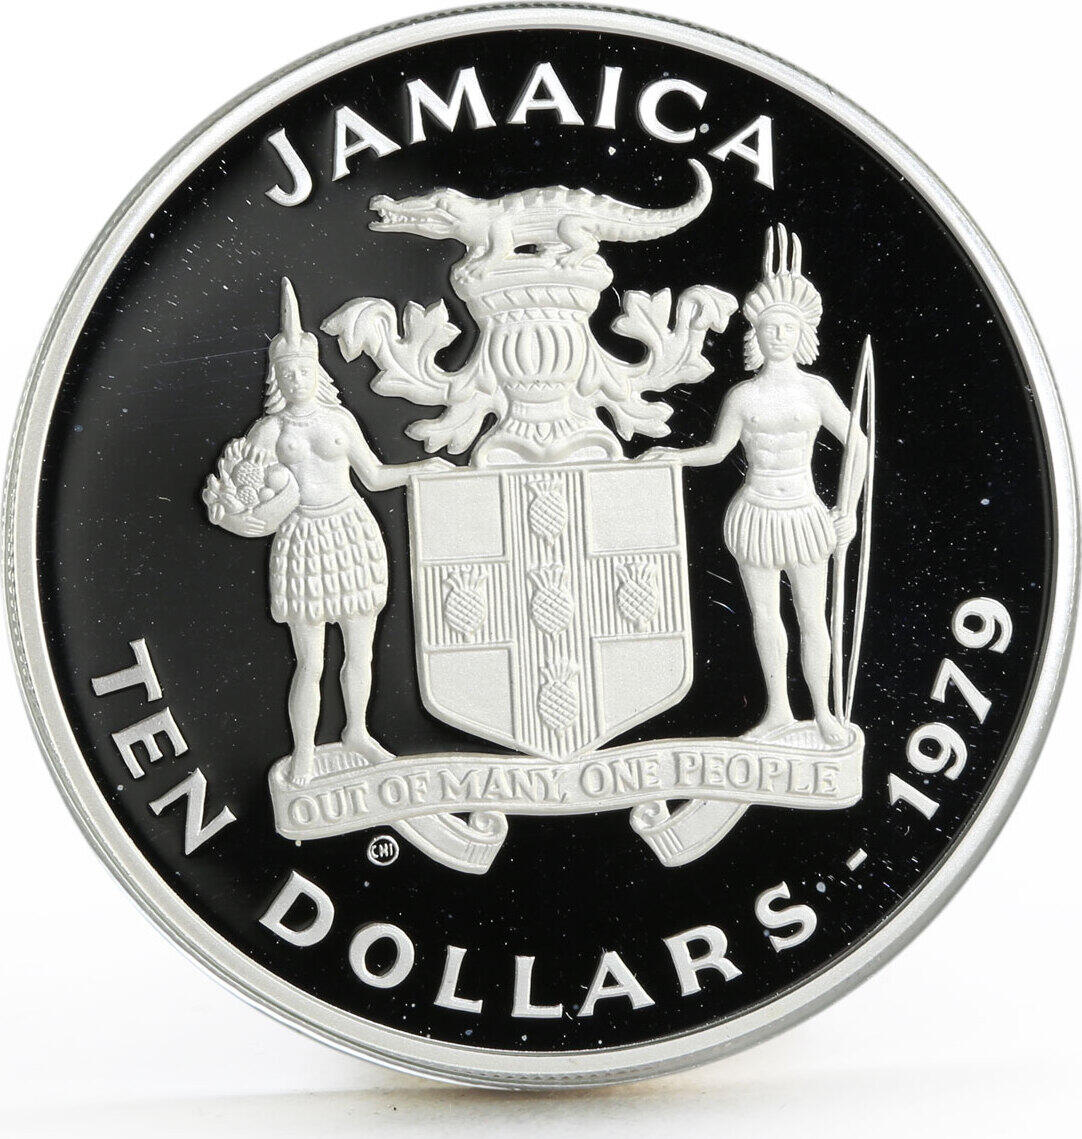 Jamaica - JAMAICA 10 DOLLARS 1979 SILVER PROOF International Year of the  Child free shipping via registered air mail